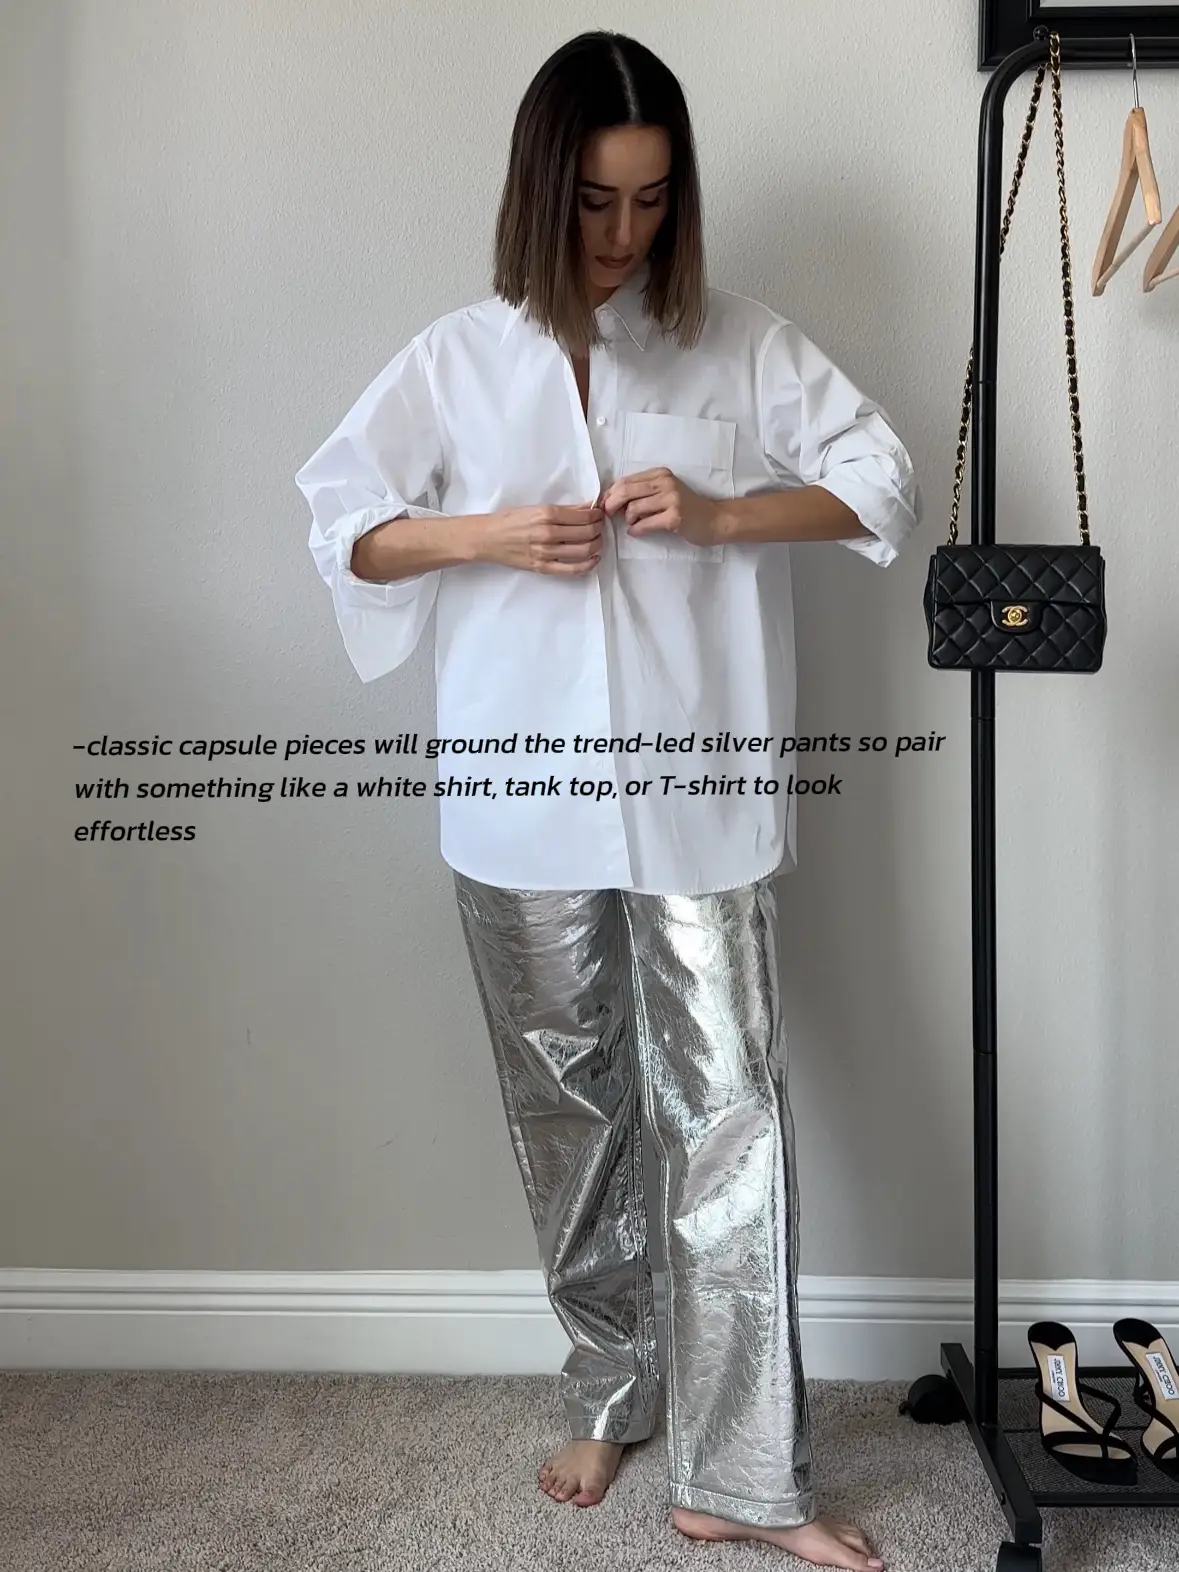 👇🏽PRO TIPS on How To Style Metallic Pants:, Gallery posted by  Modeetchien